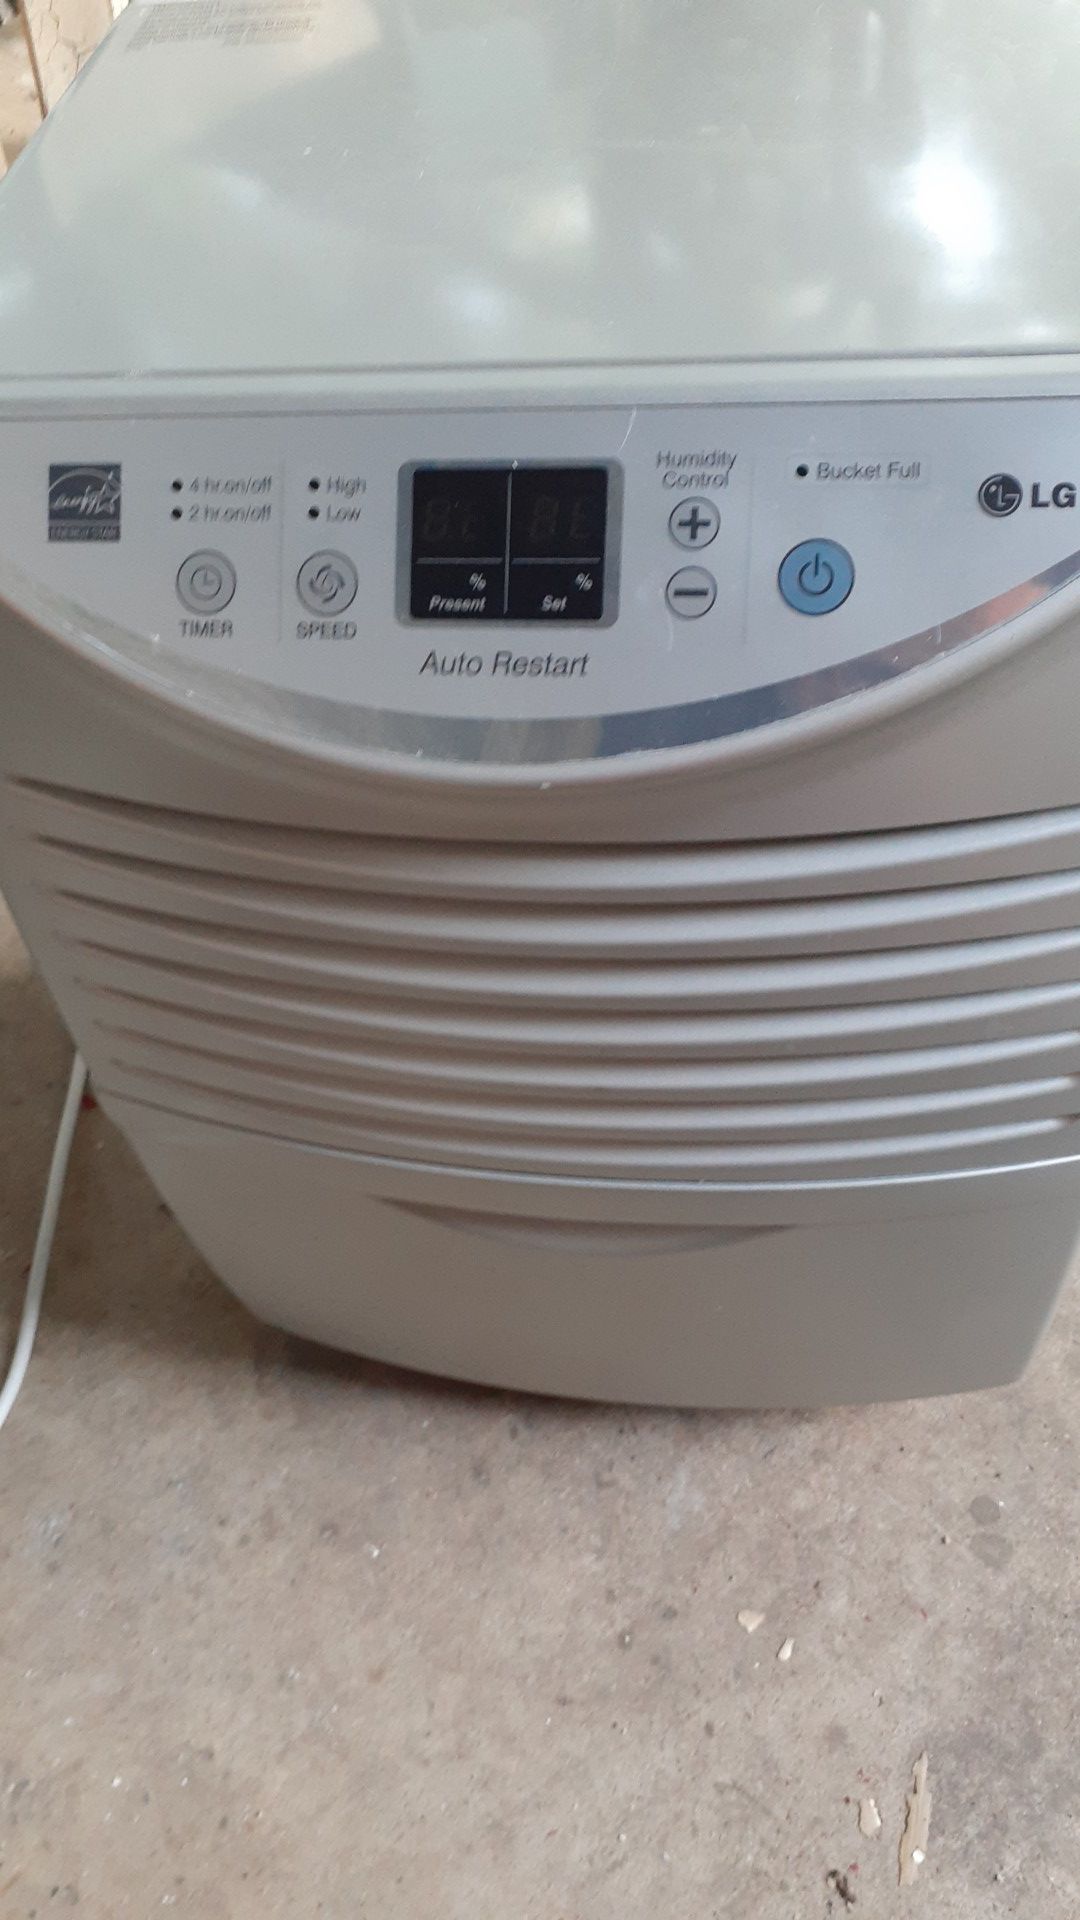 Lg dehumidifier great price works good